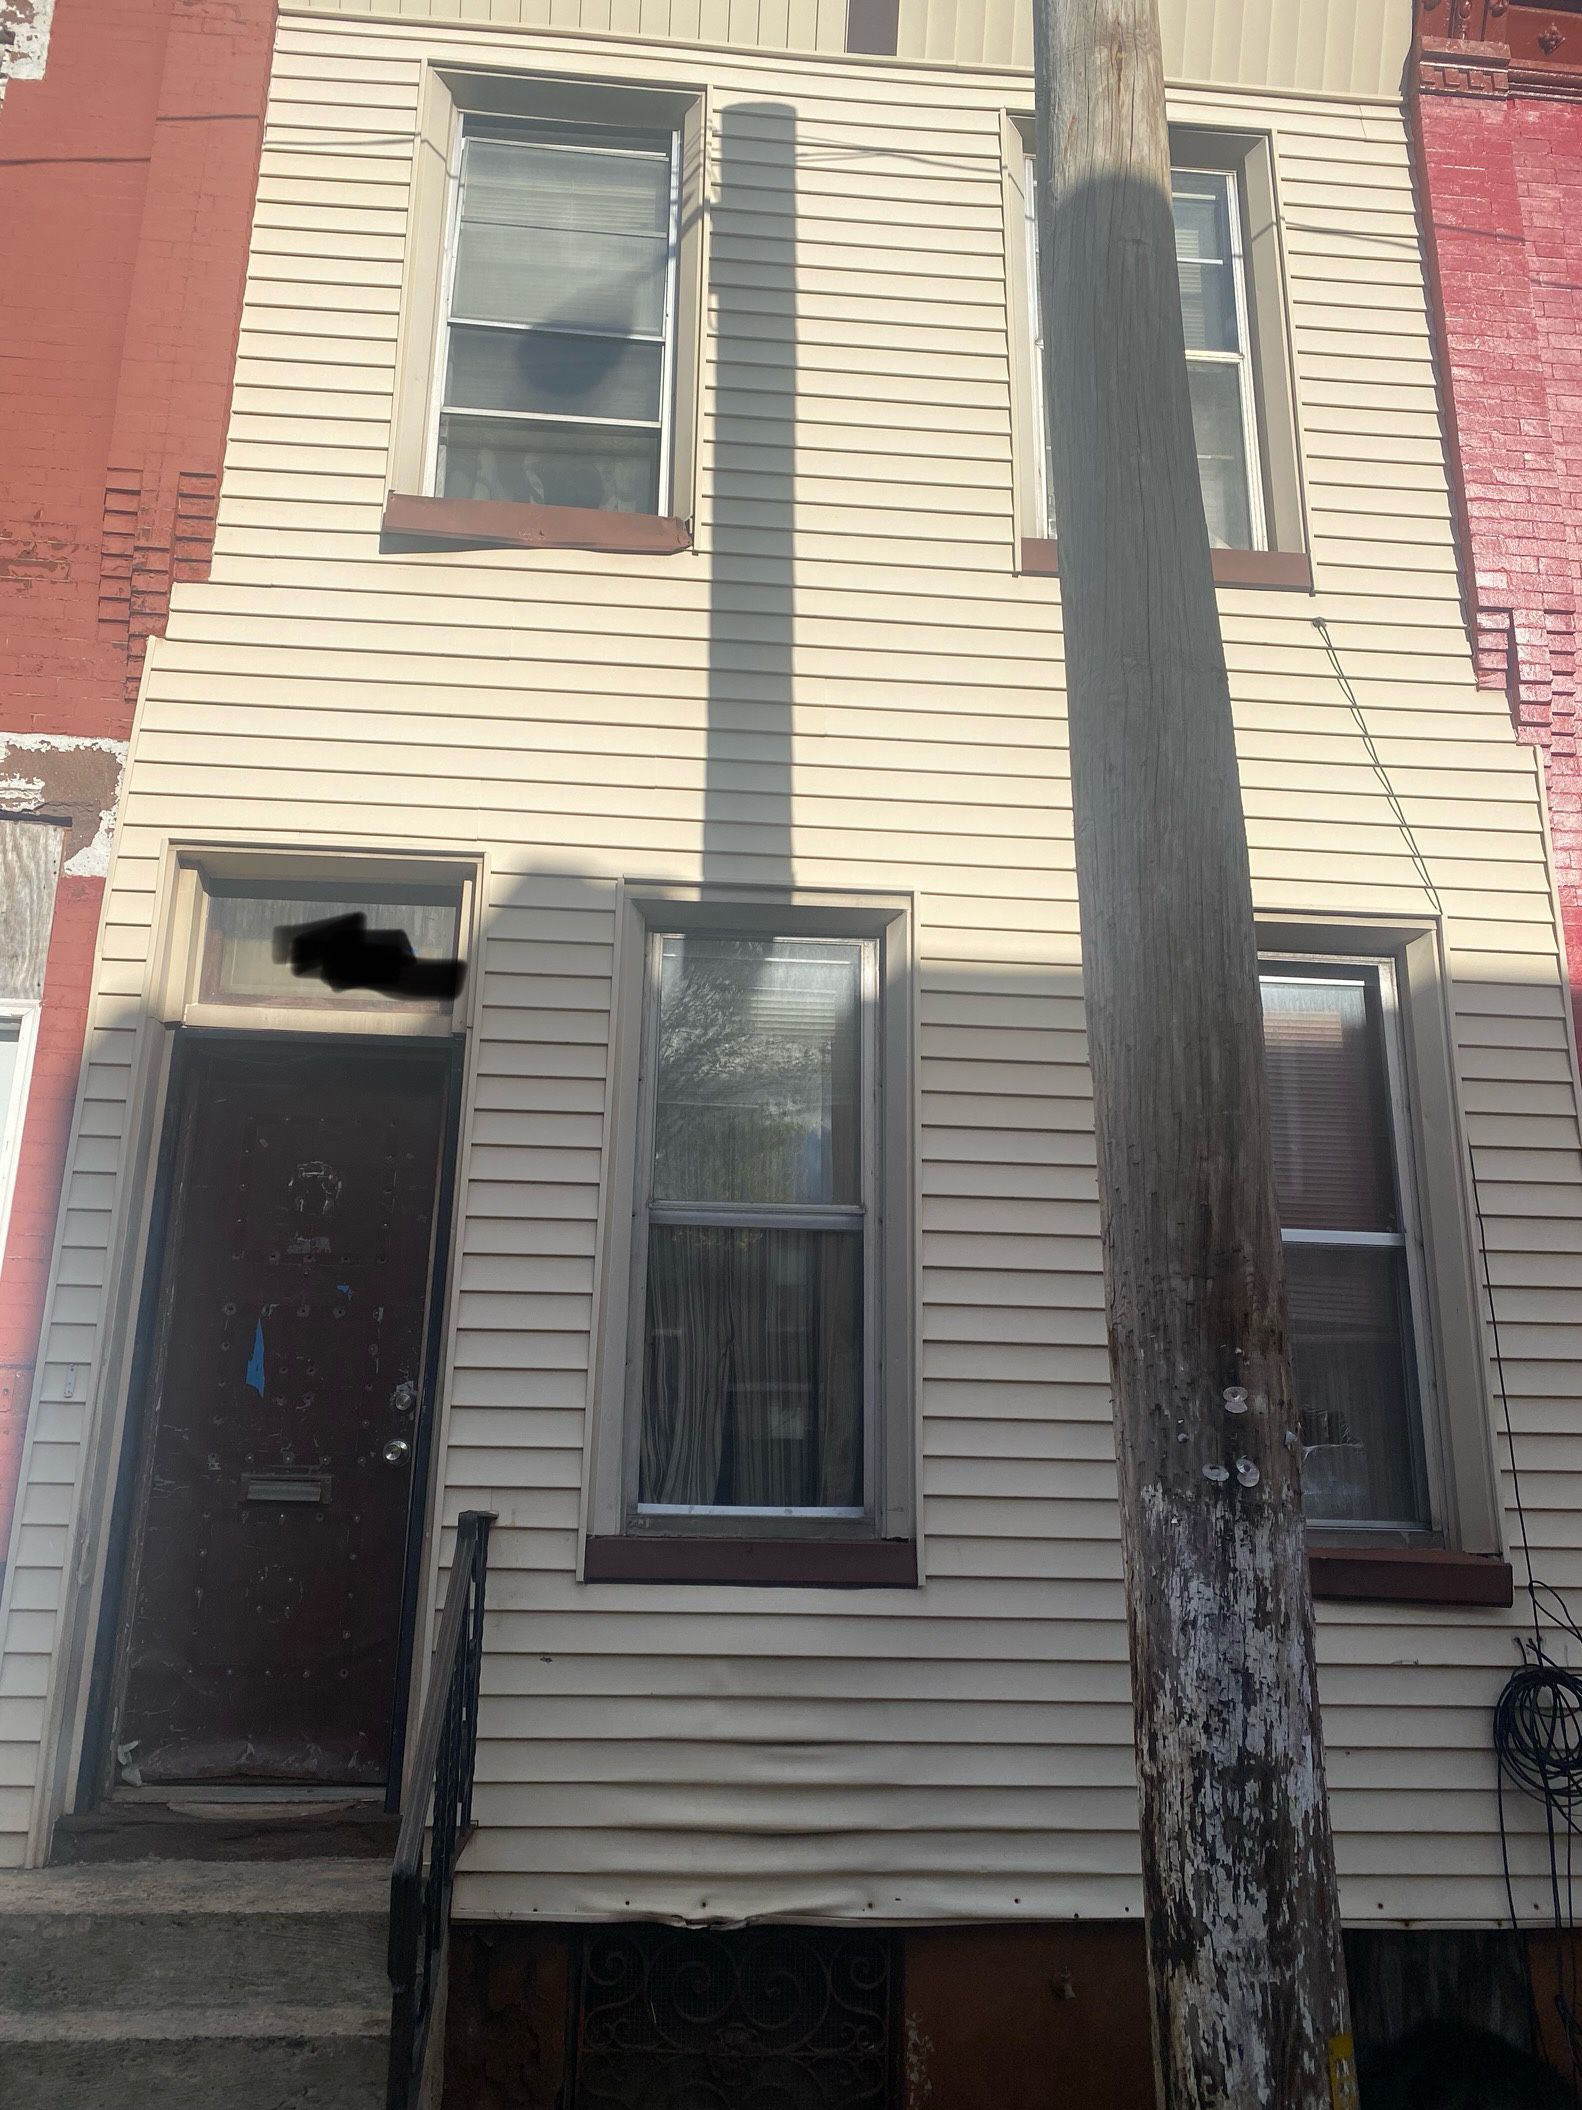 HOUSE FOR SALE IN NORTH PHILLY LESS THAN 10 MINUTES TO TEMPLE MAIN CAMPUS 19132 